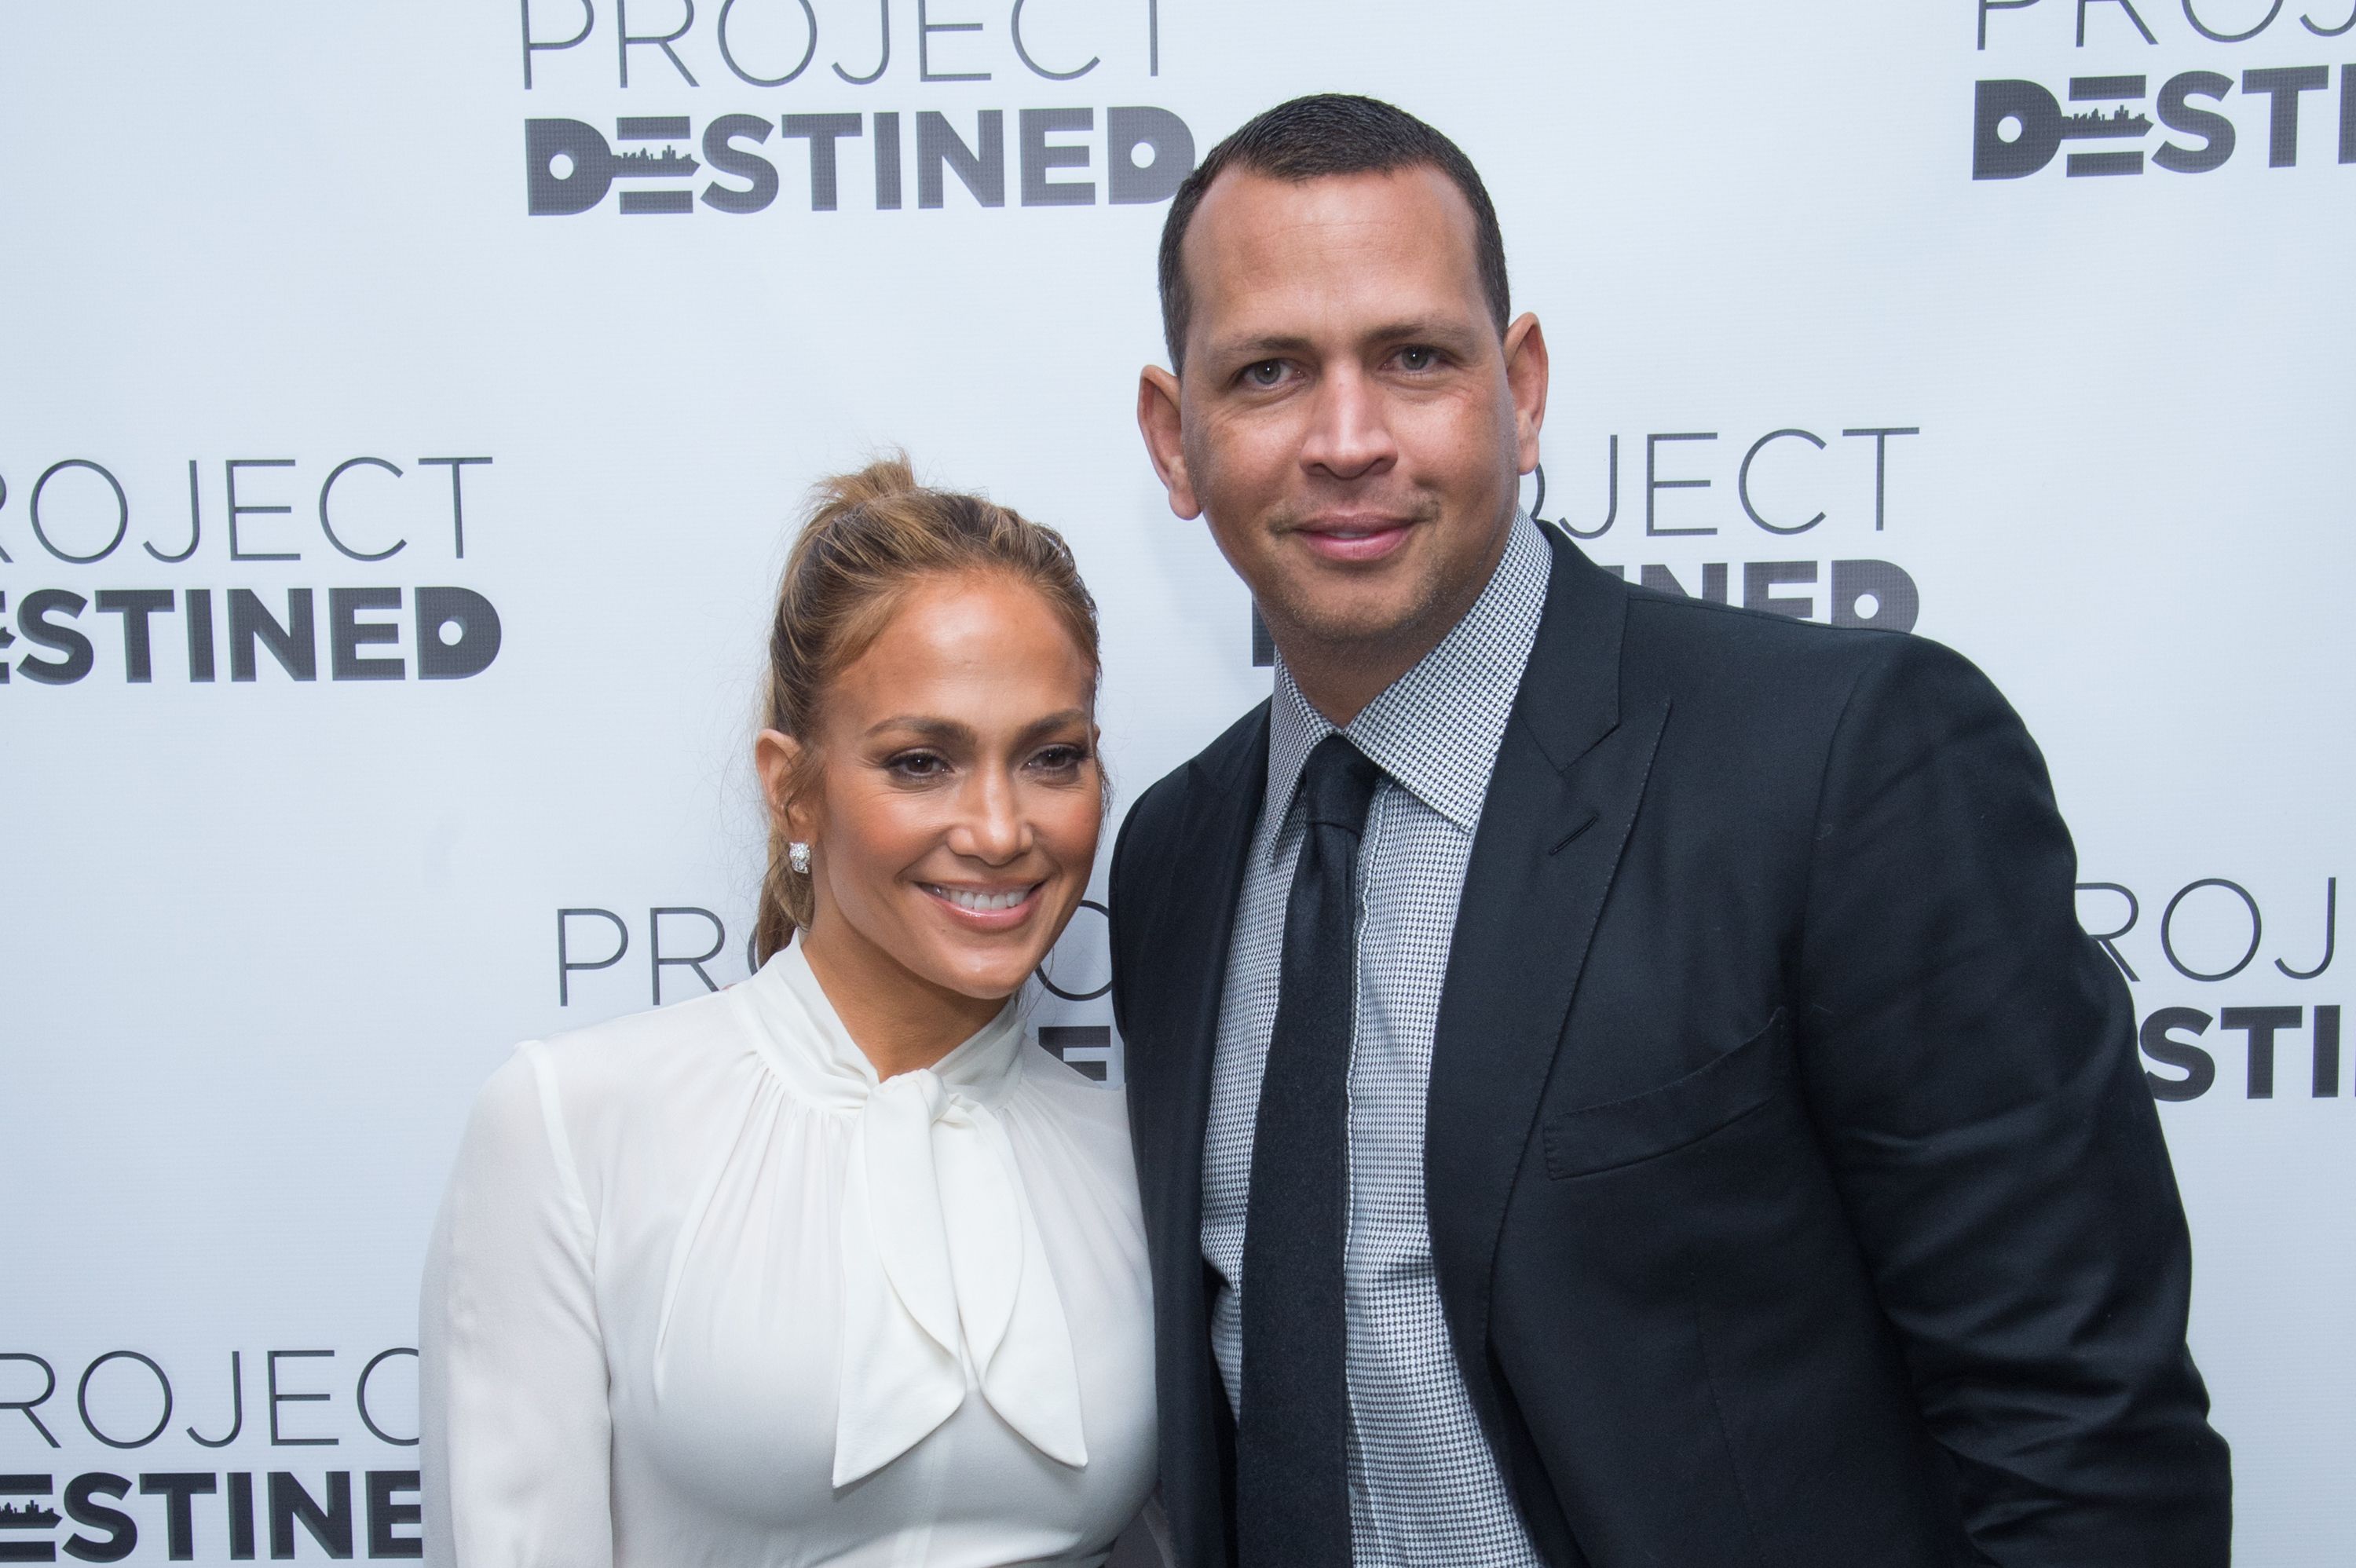 Jennifer Lopez and Alex Rodriguez at "Project Destined" Yankees Shark Tank Presentations at Yankee Stadium on March 4, 2018 in New York City | Photo: Getty Images